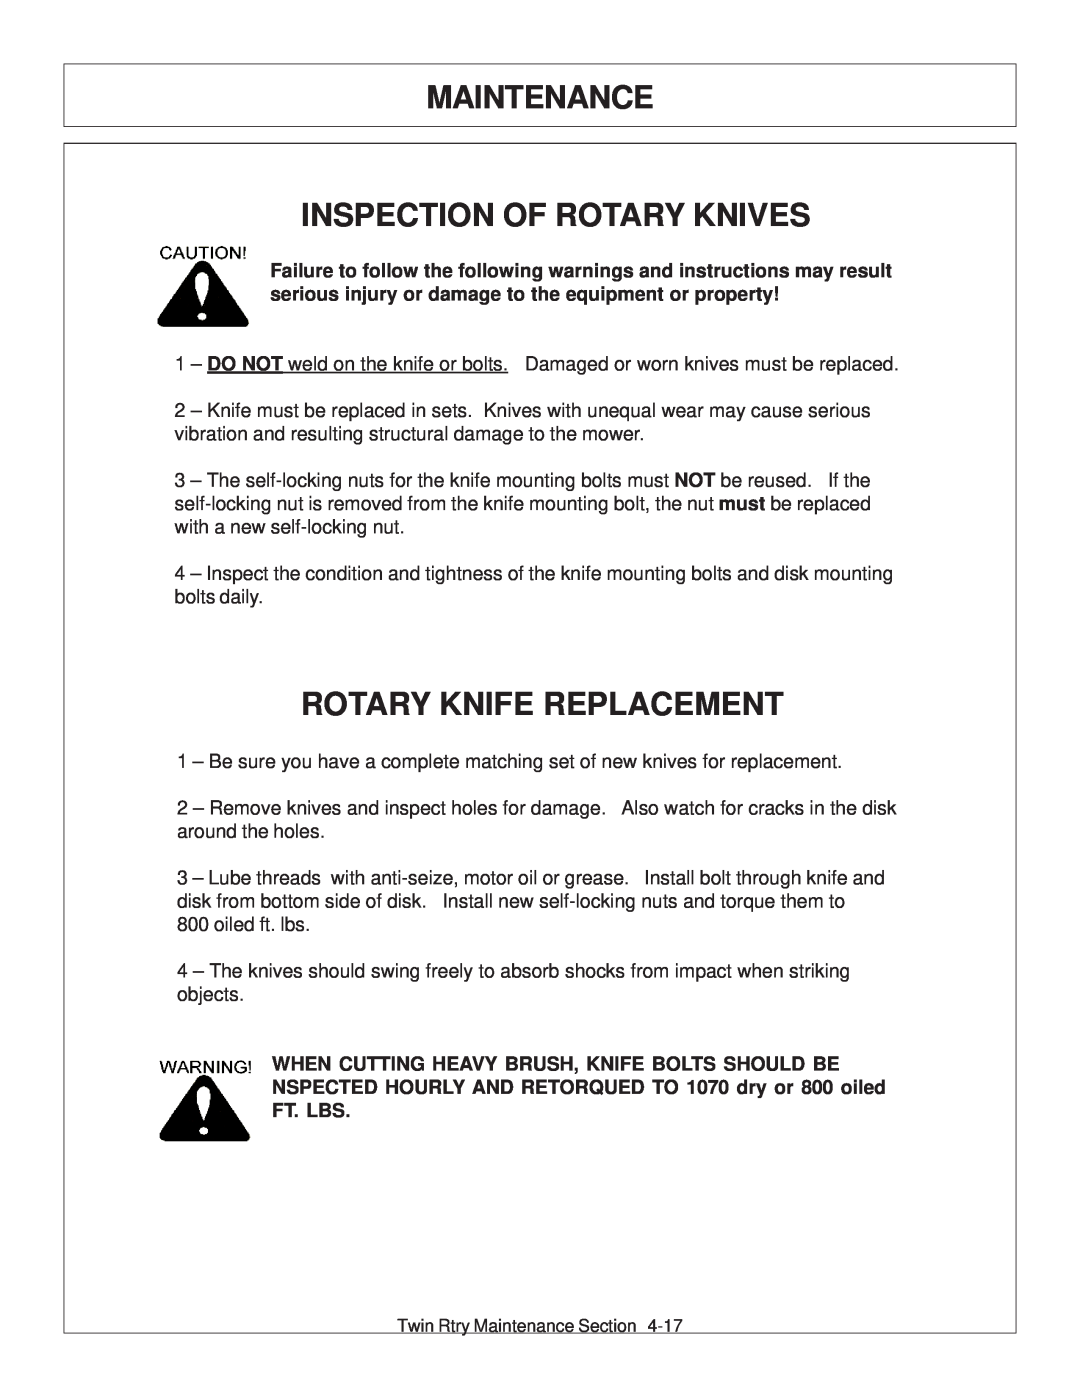 Tiger Products Co., Ltd 6020009 manual Inspection Of Rotary Knives, Rotary Knife Replacement, Maintenance 